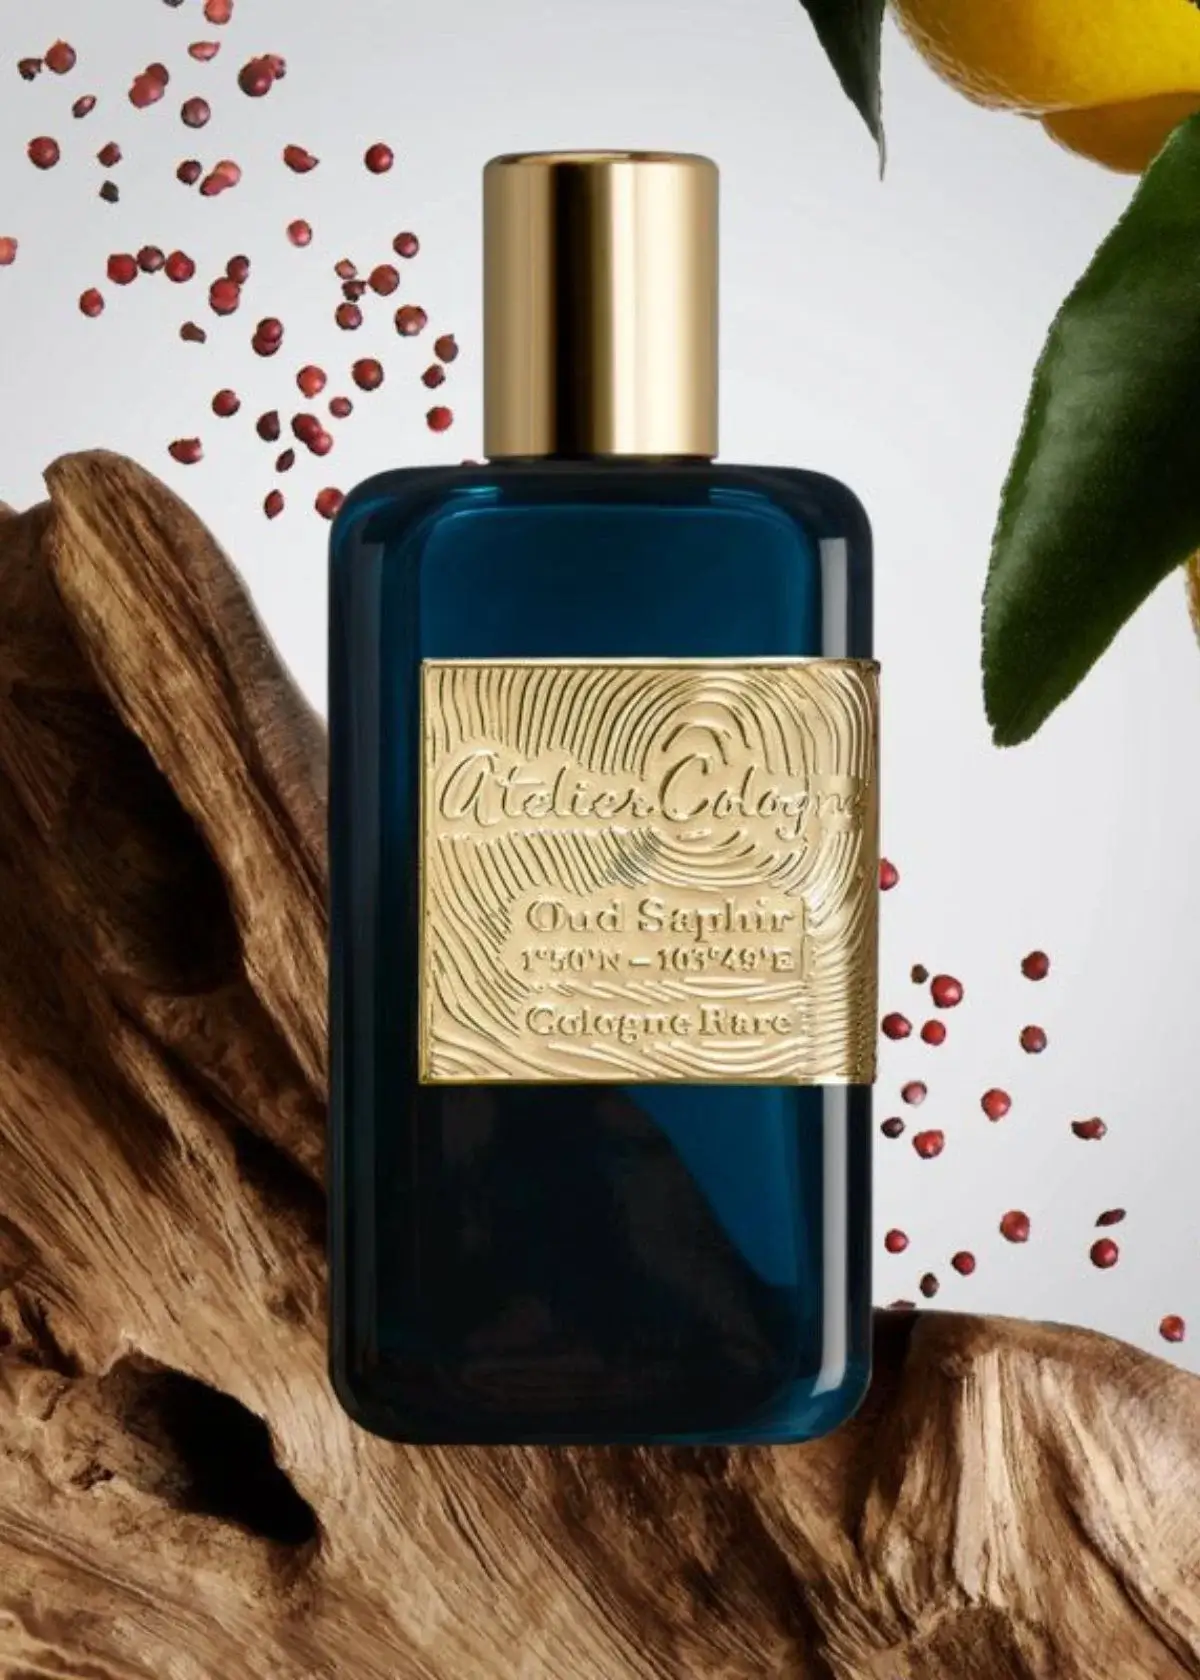 How is oud cologne made?